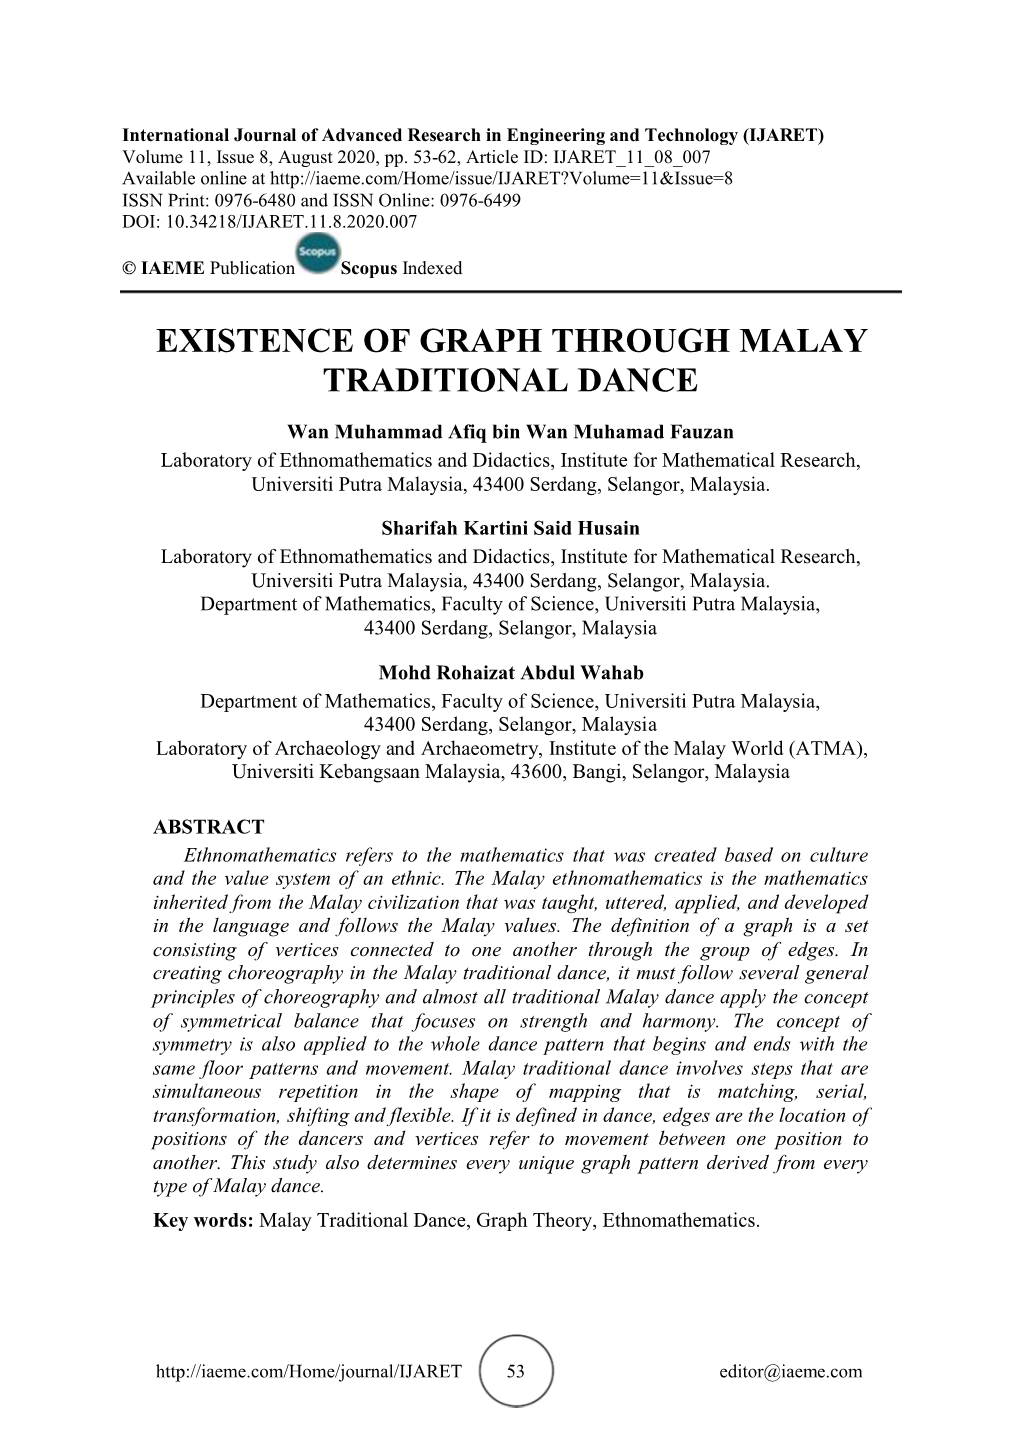 Existence of Graph Through Malay Traditional Dance